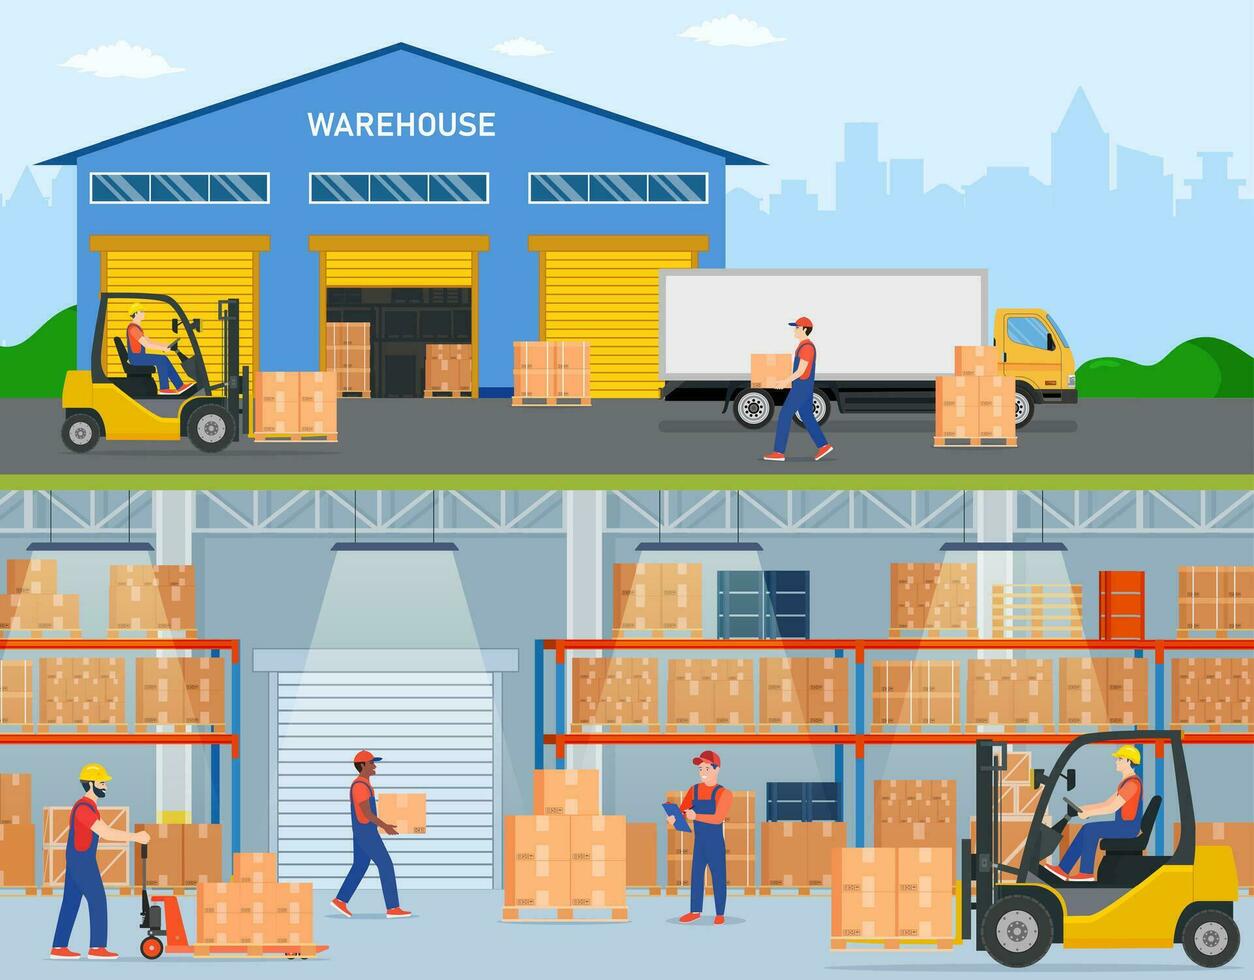 Warehouse horizontal banners with storage workers engaged in loading and unloading of goods. Interior and exterior with trucs and people.Vector illustration in flat style vector